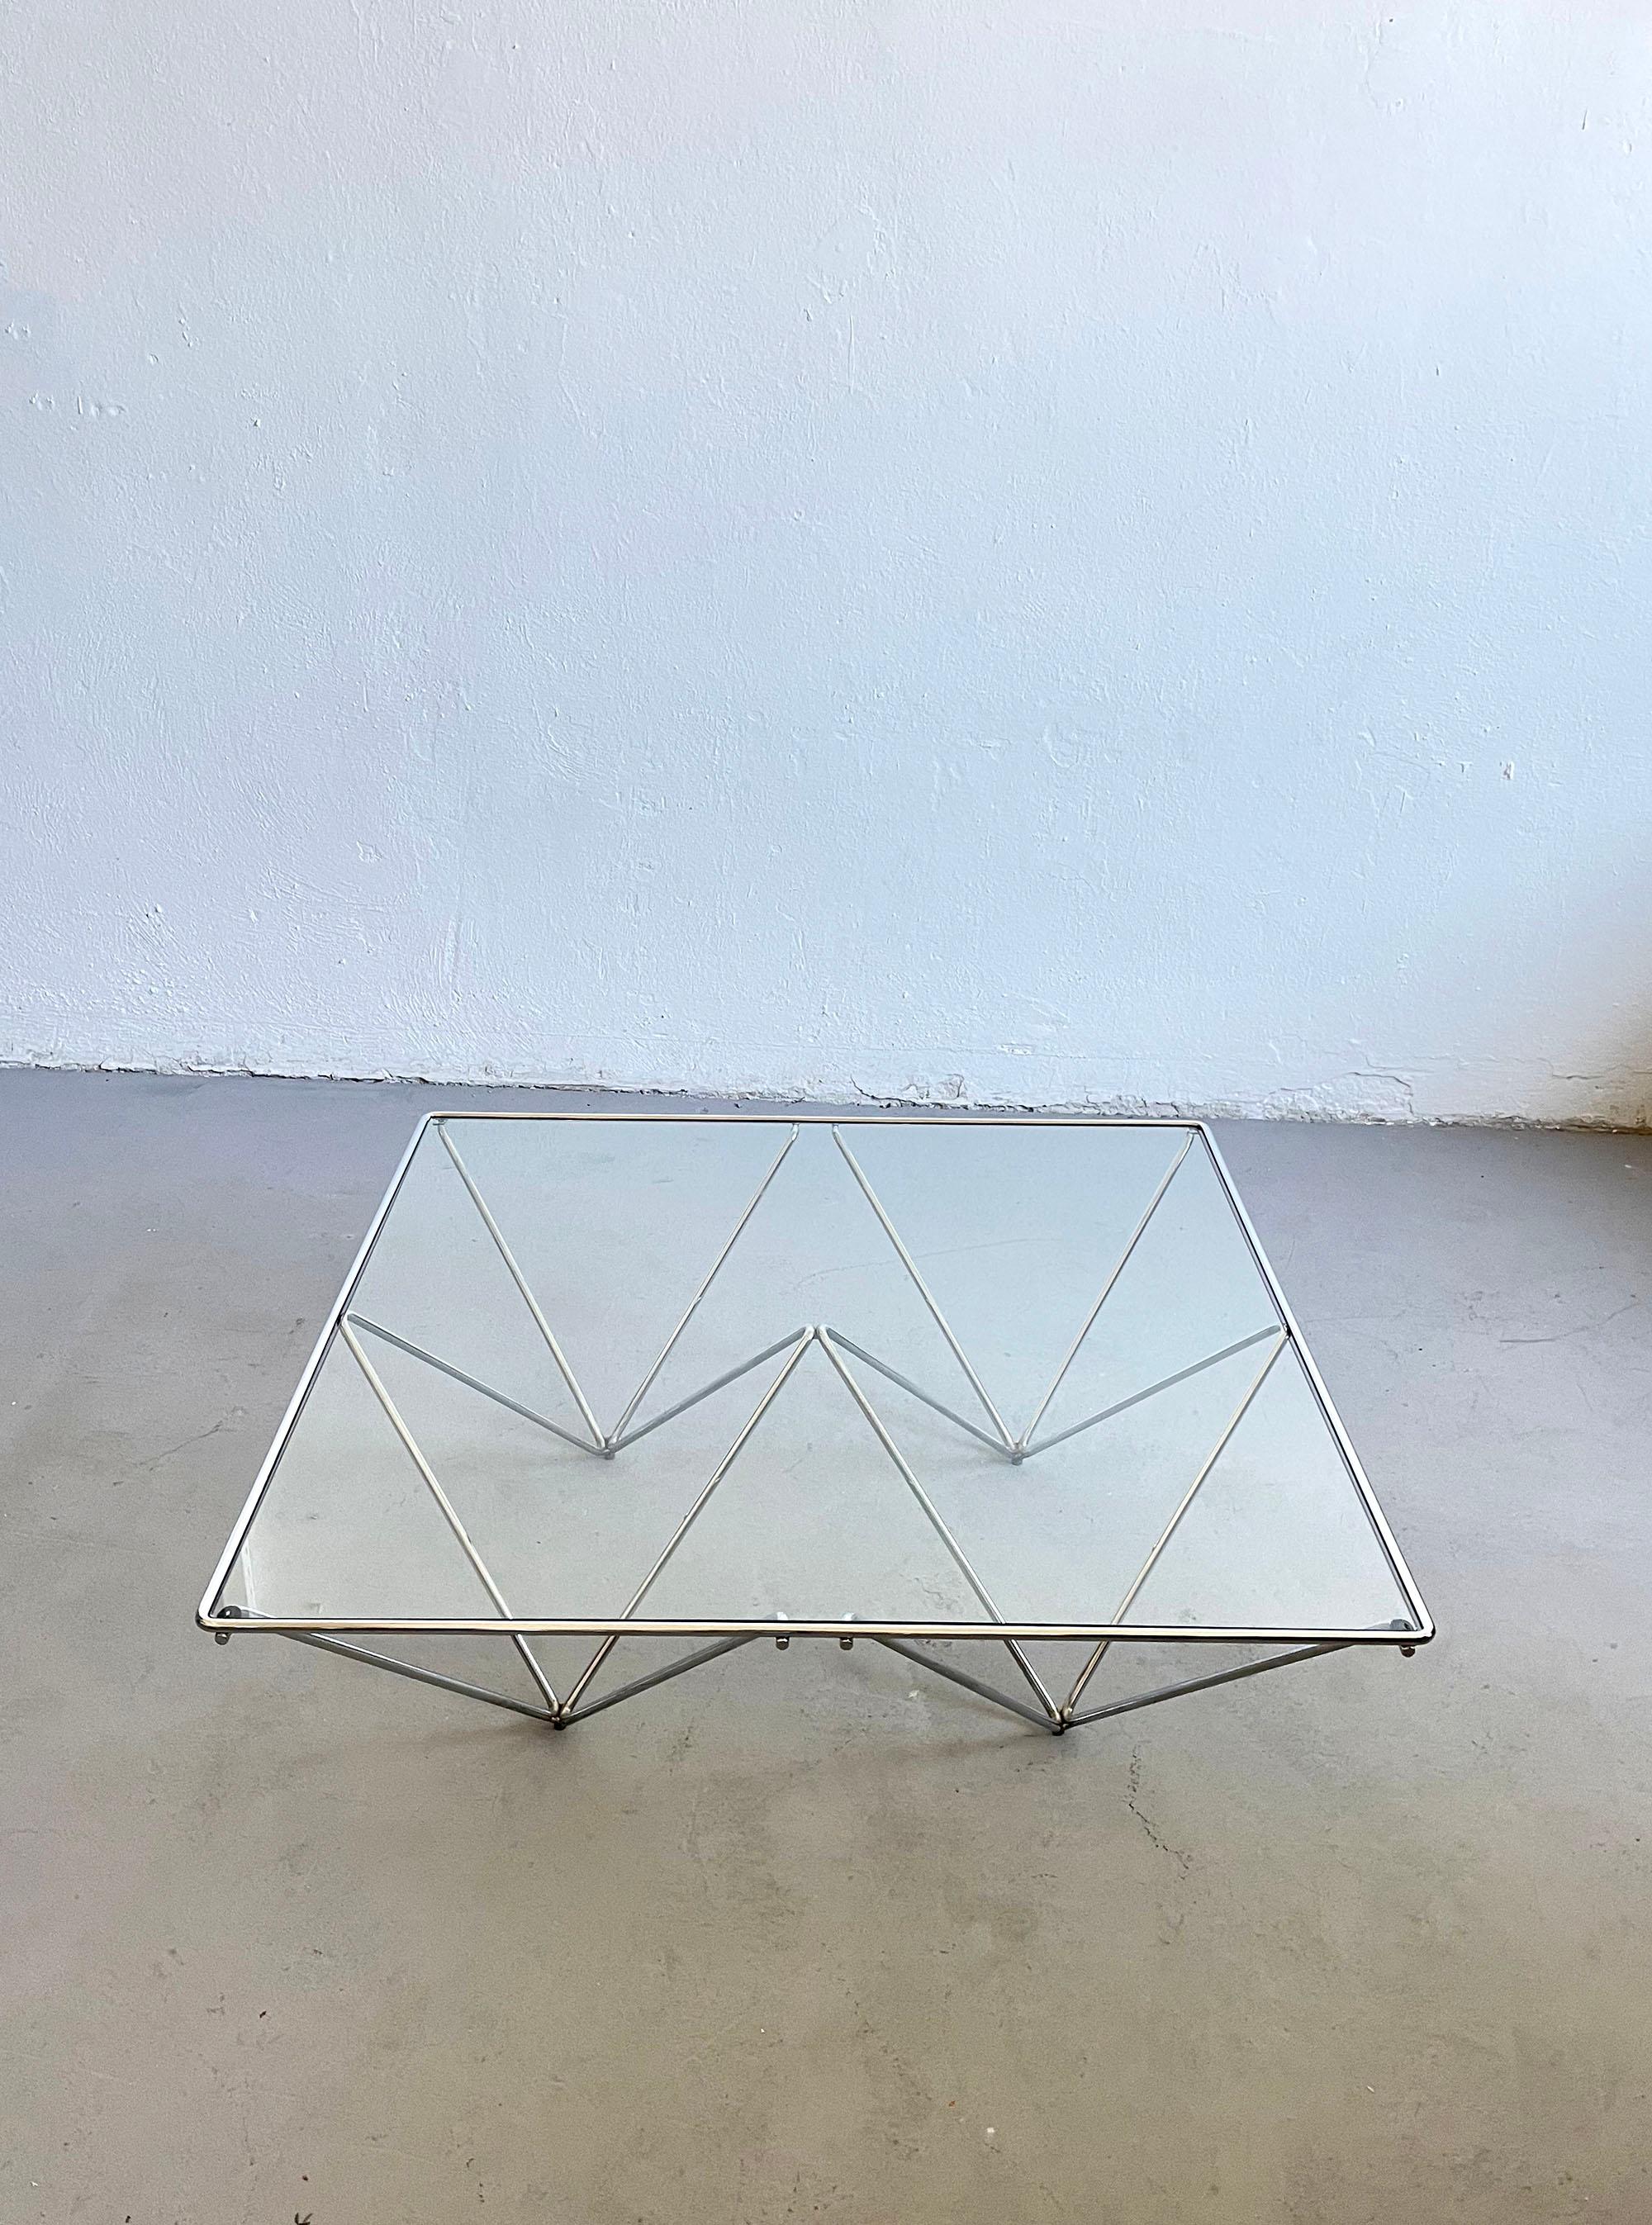 Alanda coffee table is a true design classic of the 20th century. 
Originally it was designed by Paolo Piva for B&B Italia in the 1980s.

The minimalist architectural form of the table is simple, geometrical and very elegant. 
The chromed steel